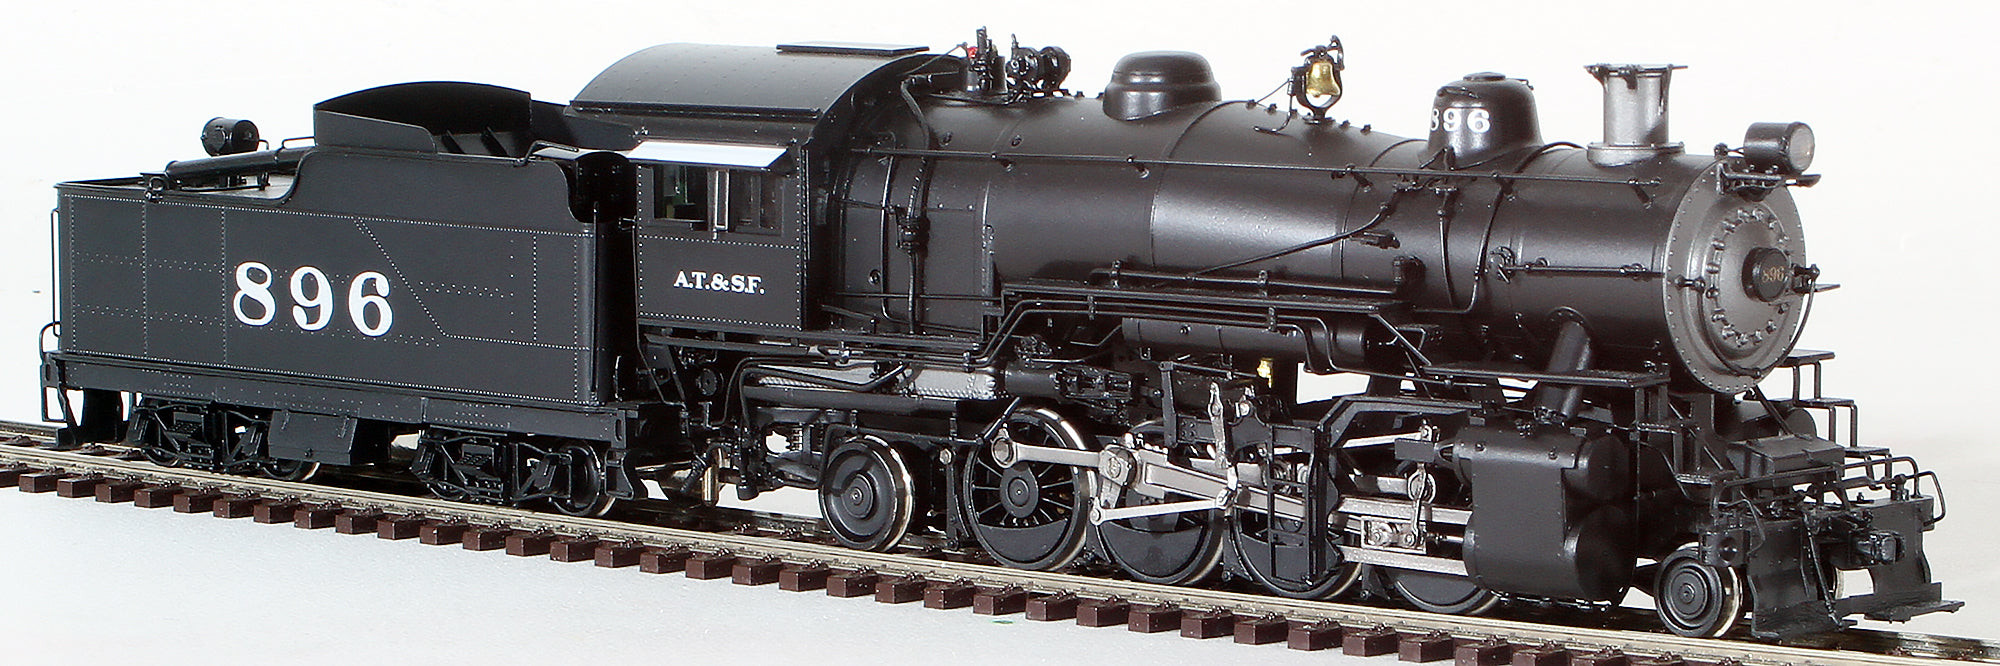 HO SCALE BRASS train CONTINENTAL M-8 ENGNE AND TENDER, MADE IN JAPAN  1959!!!! - Remote Control Toys & Vehicles